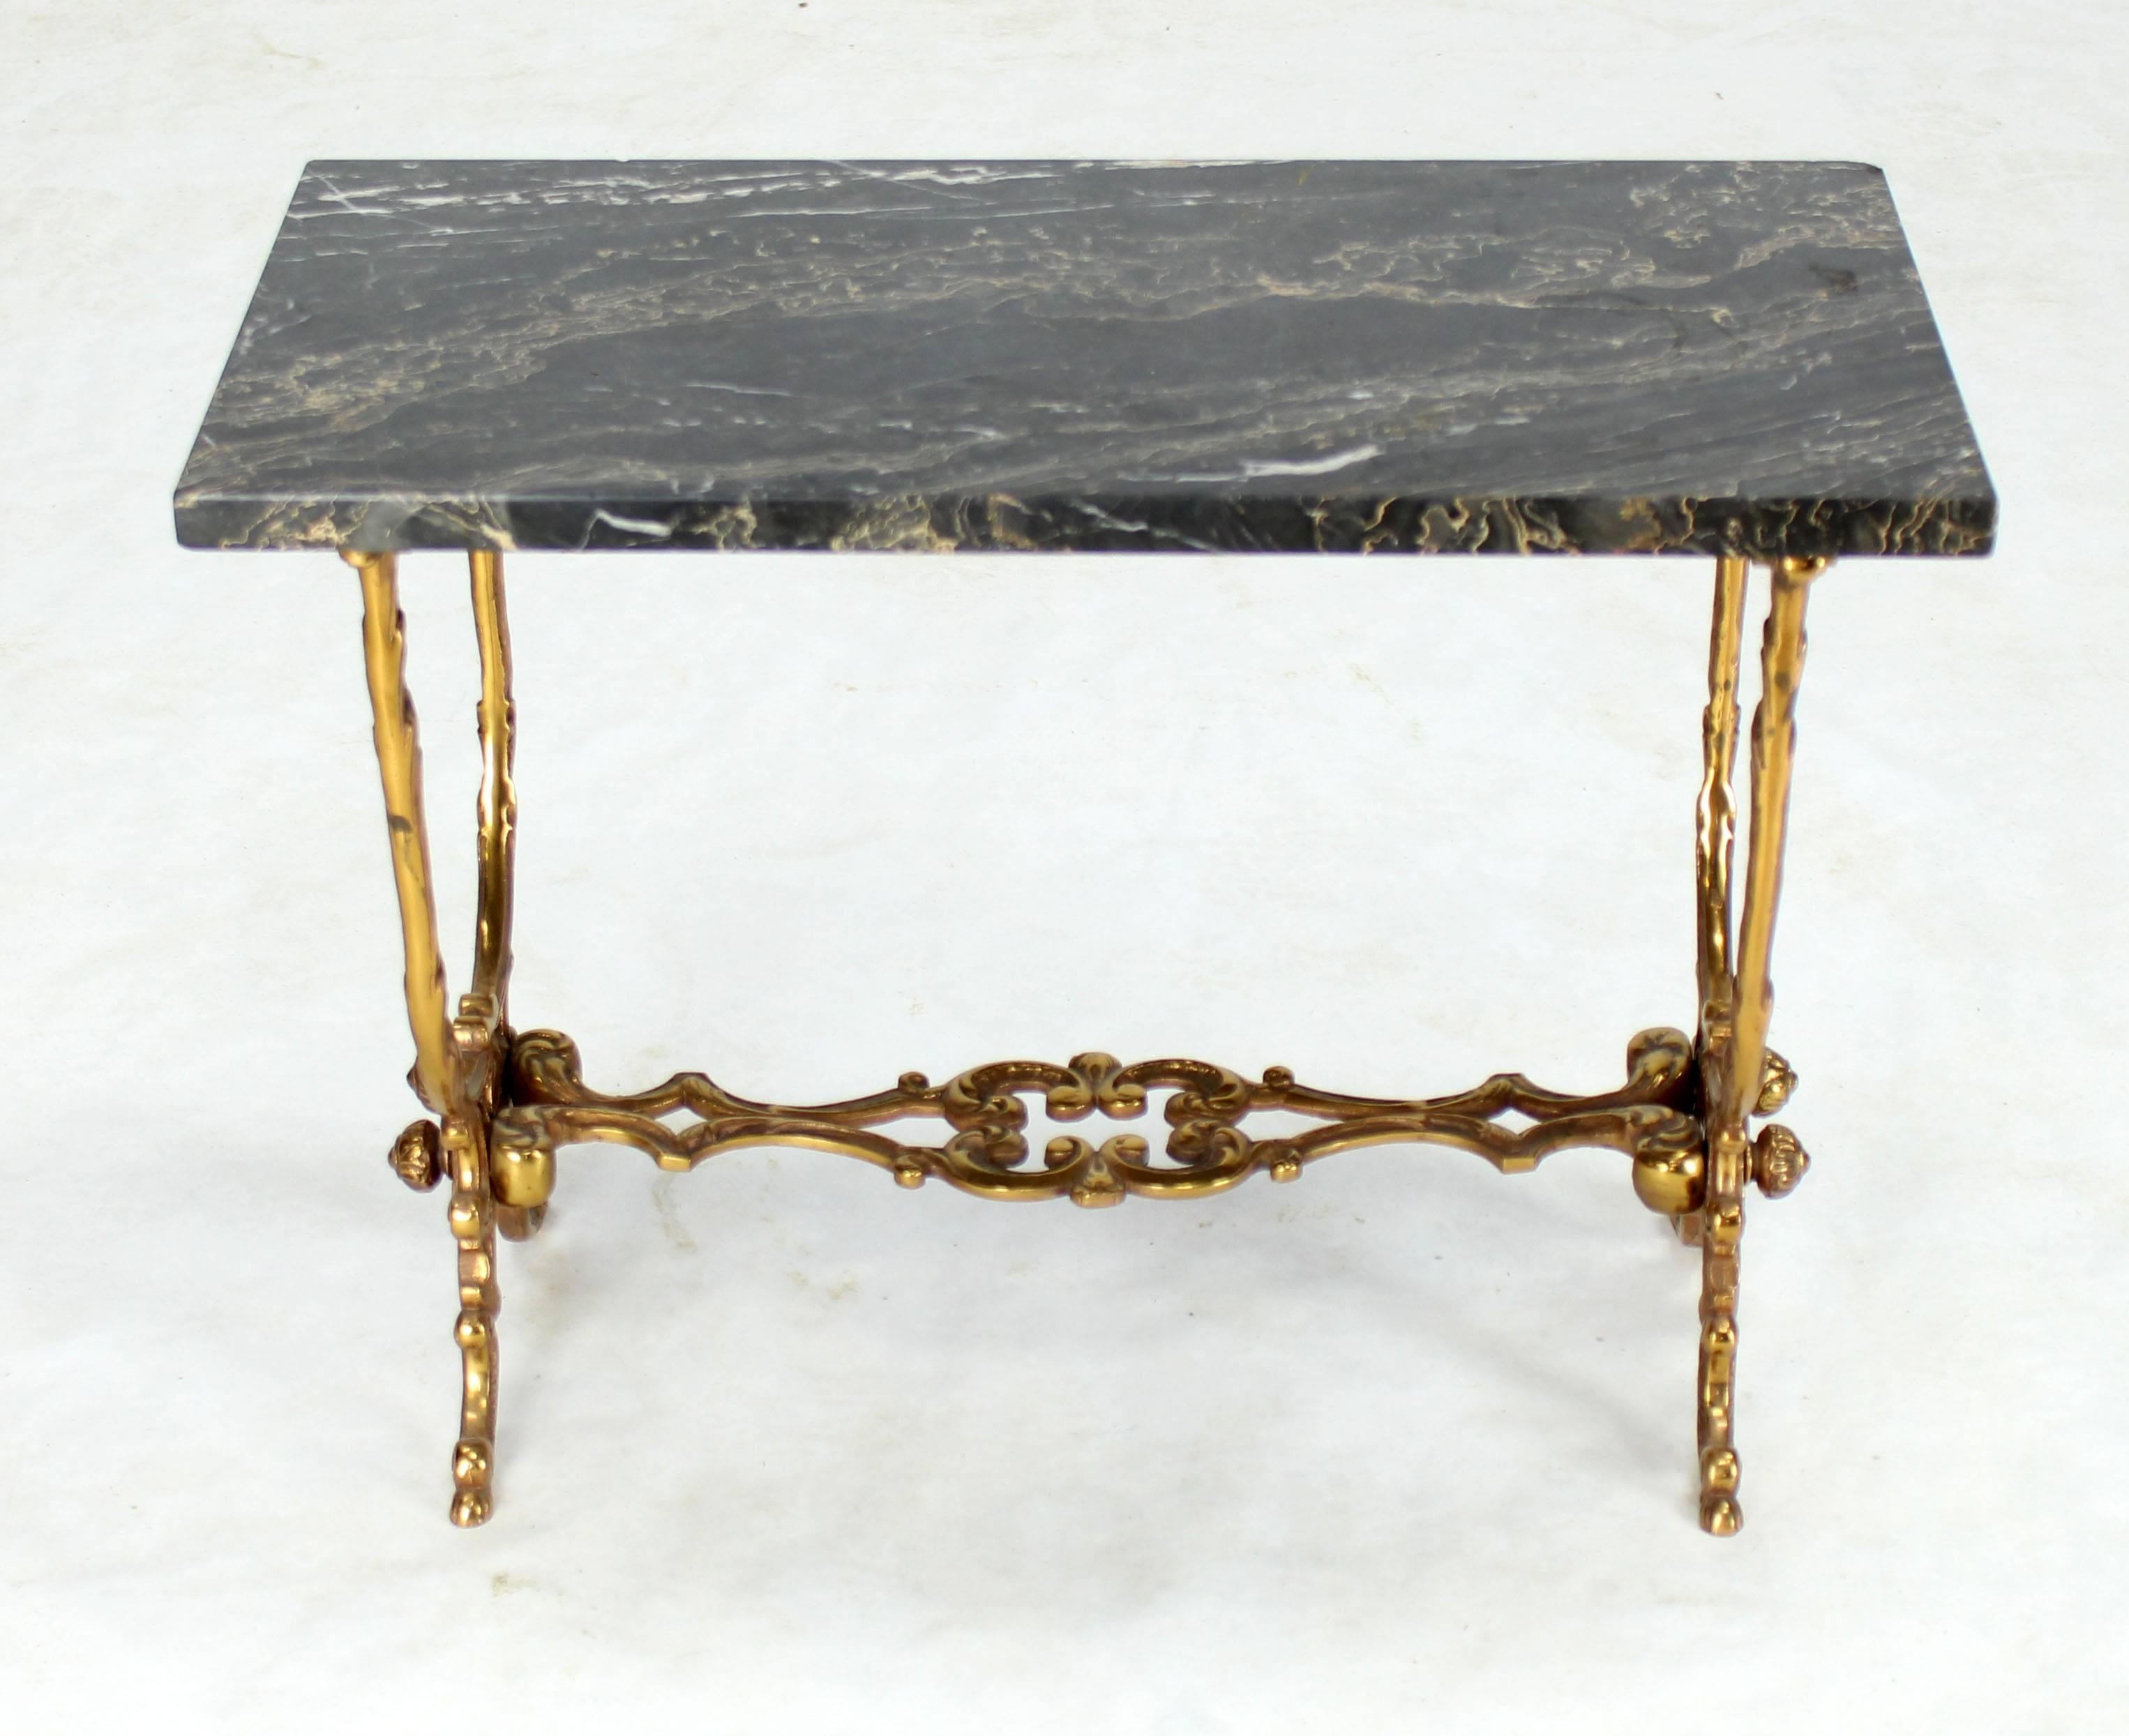 Gorgeous heavy solid cast bronze side table with marble top.